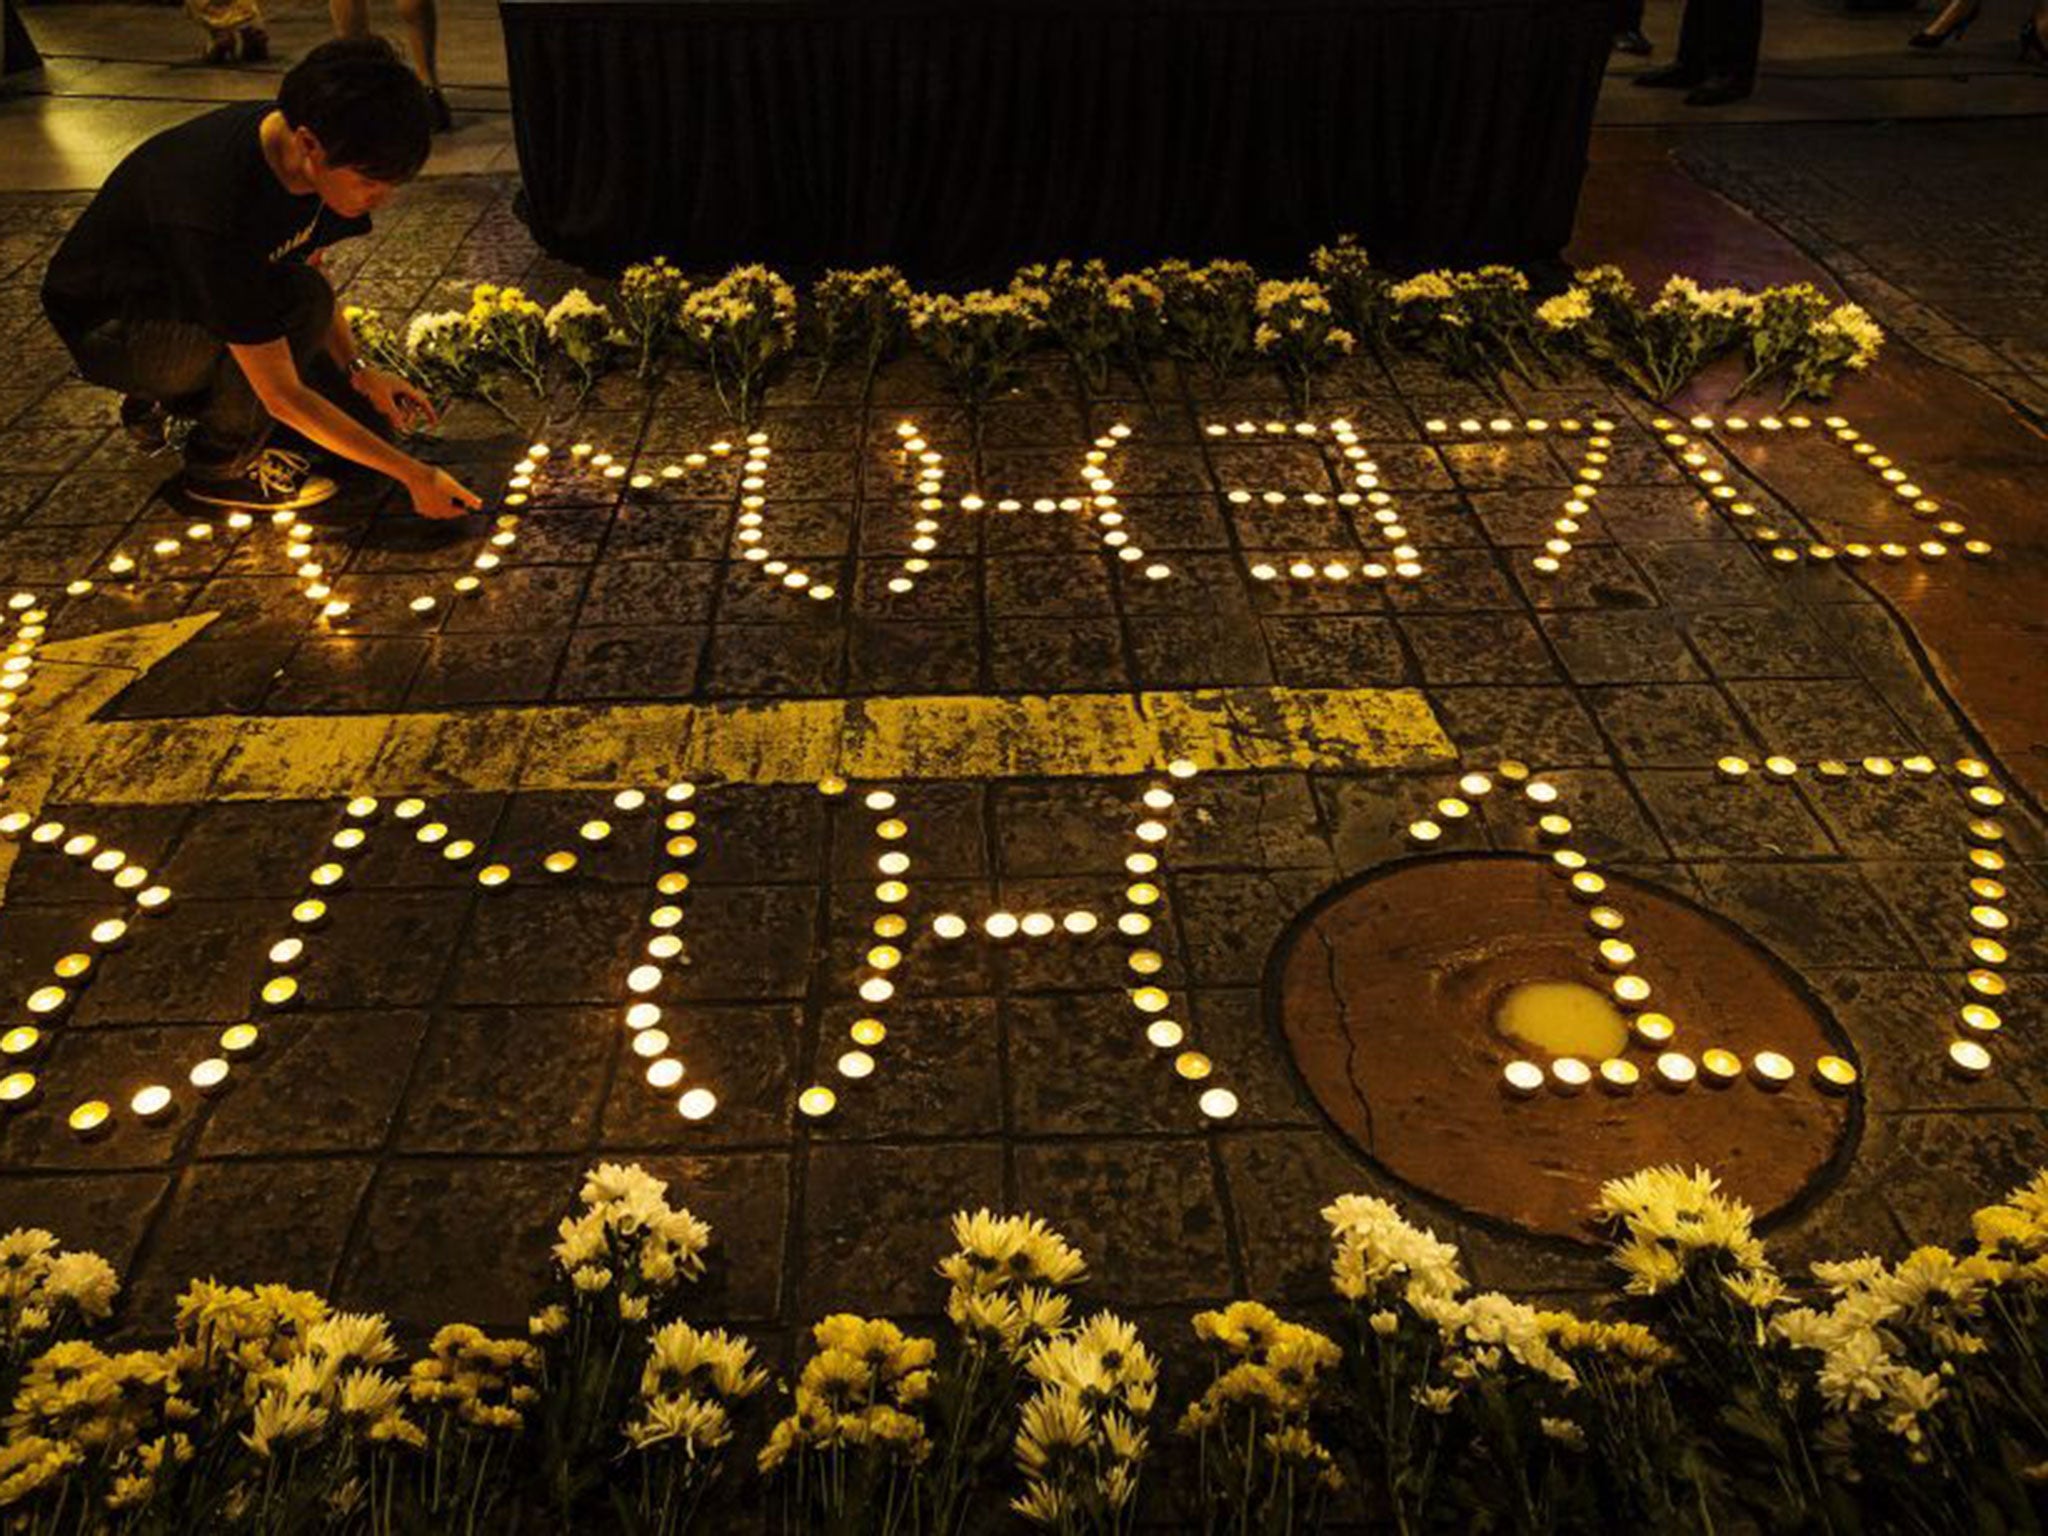 A Malaysian man lights up candles during a vigil in remembrance for passengers and crew of the Malaysian Airline flight MH370 & MH17 in Petaling Jaya near Kuala Lumpur, Malaysia